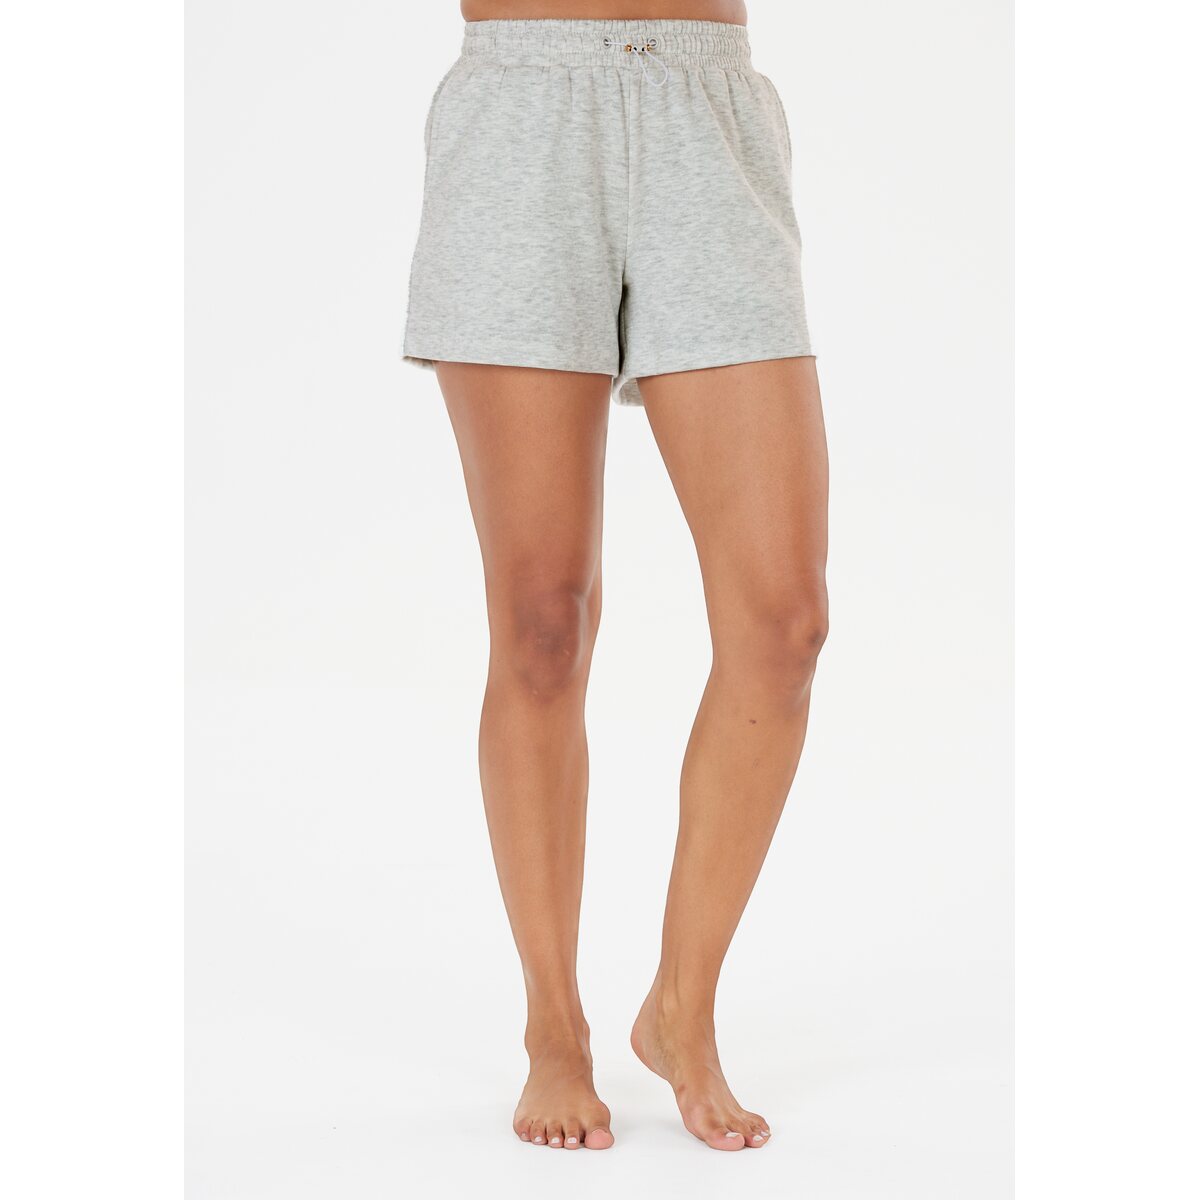 Athlecia Ruthie Womenswear Shorts 1 Shaws Department Stores